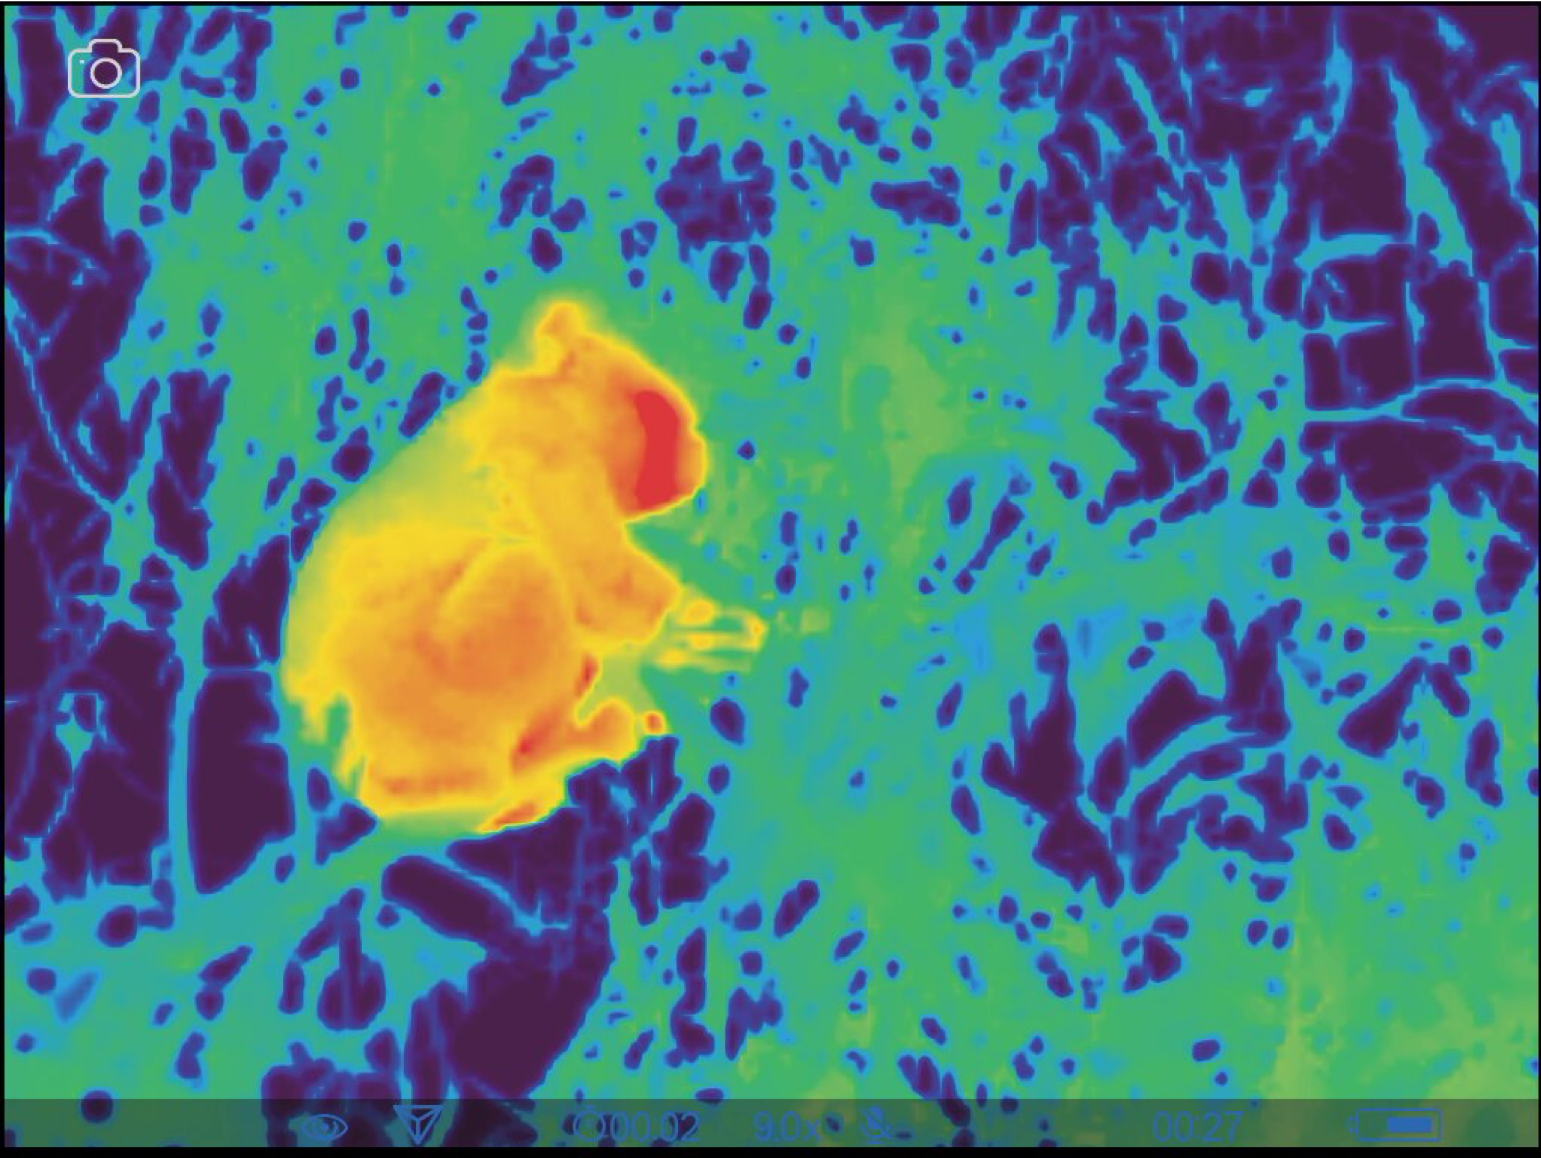 A thermal image in colour of a koala from close up. The koala is orange and yellow, very clear against the blue and green background.